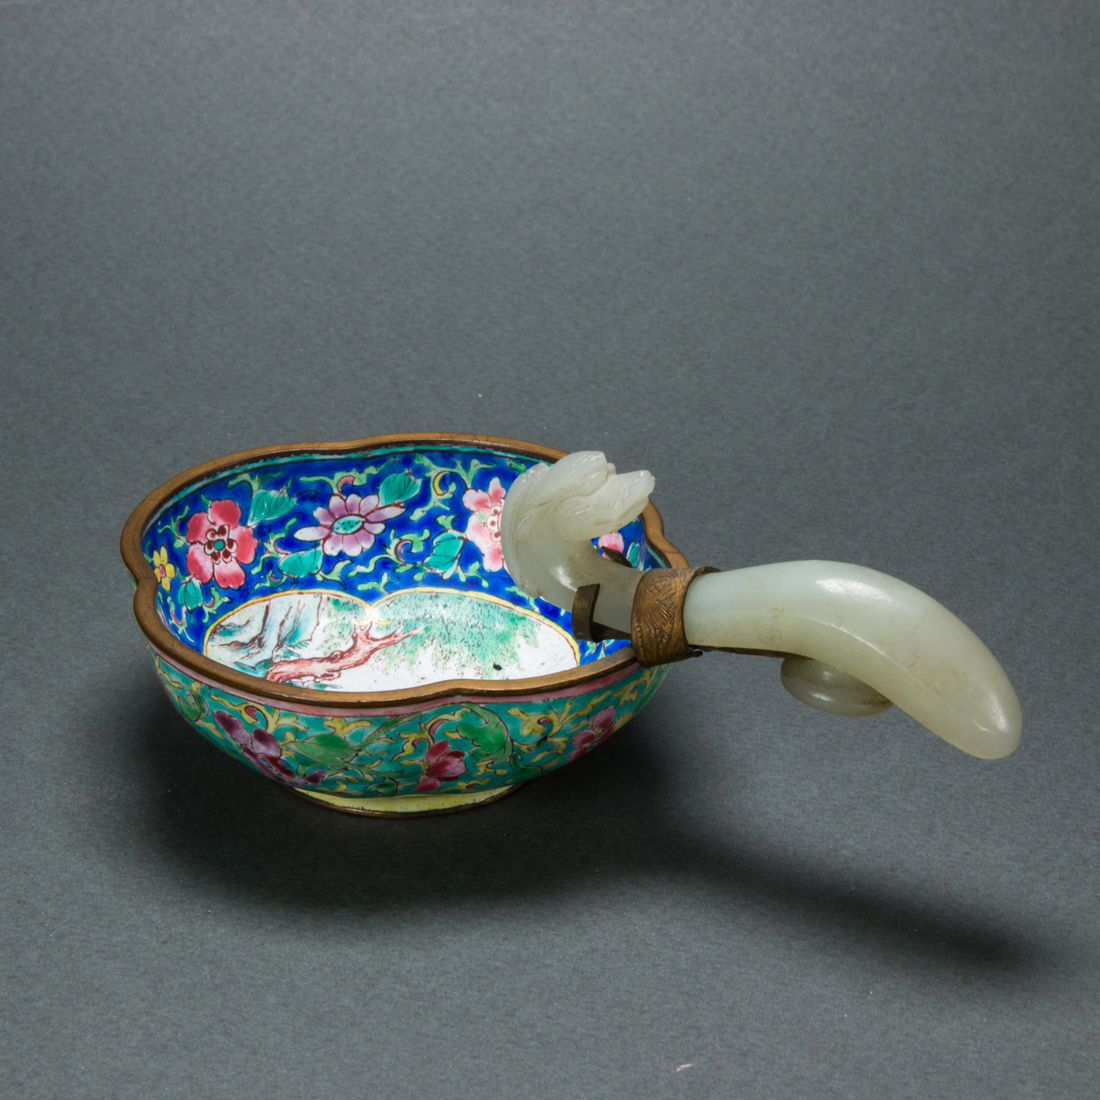 CHINESE ENAMELED BOWL WITH JADE 3a116e